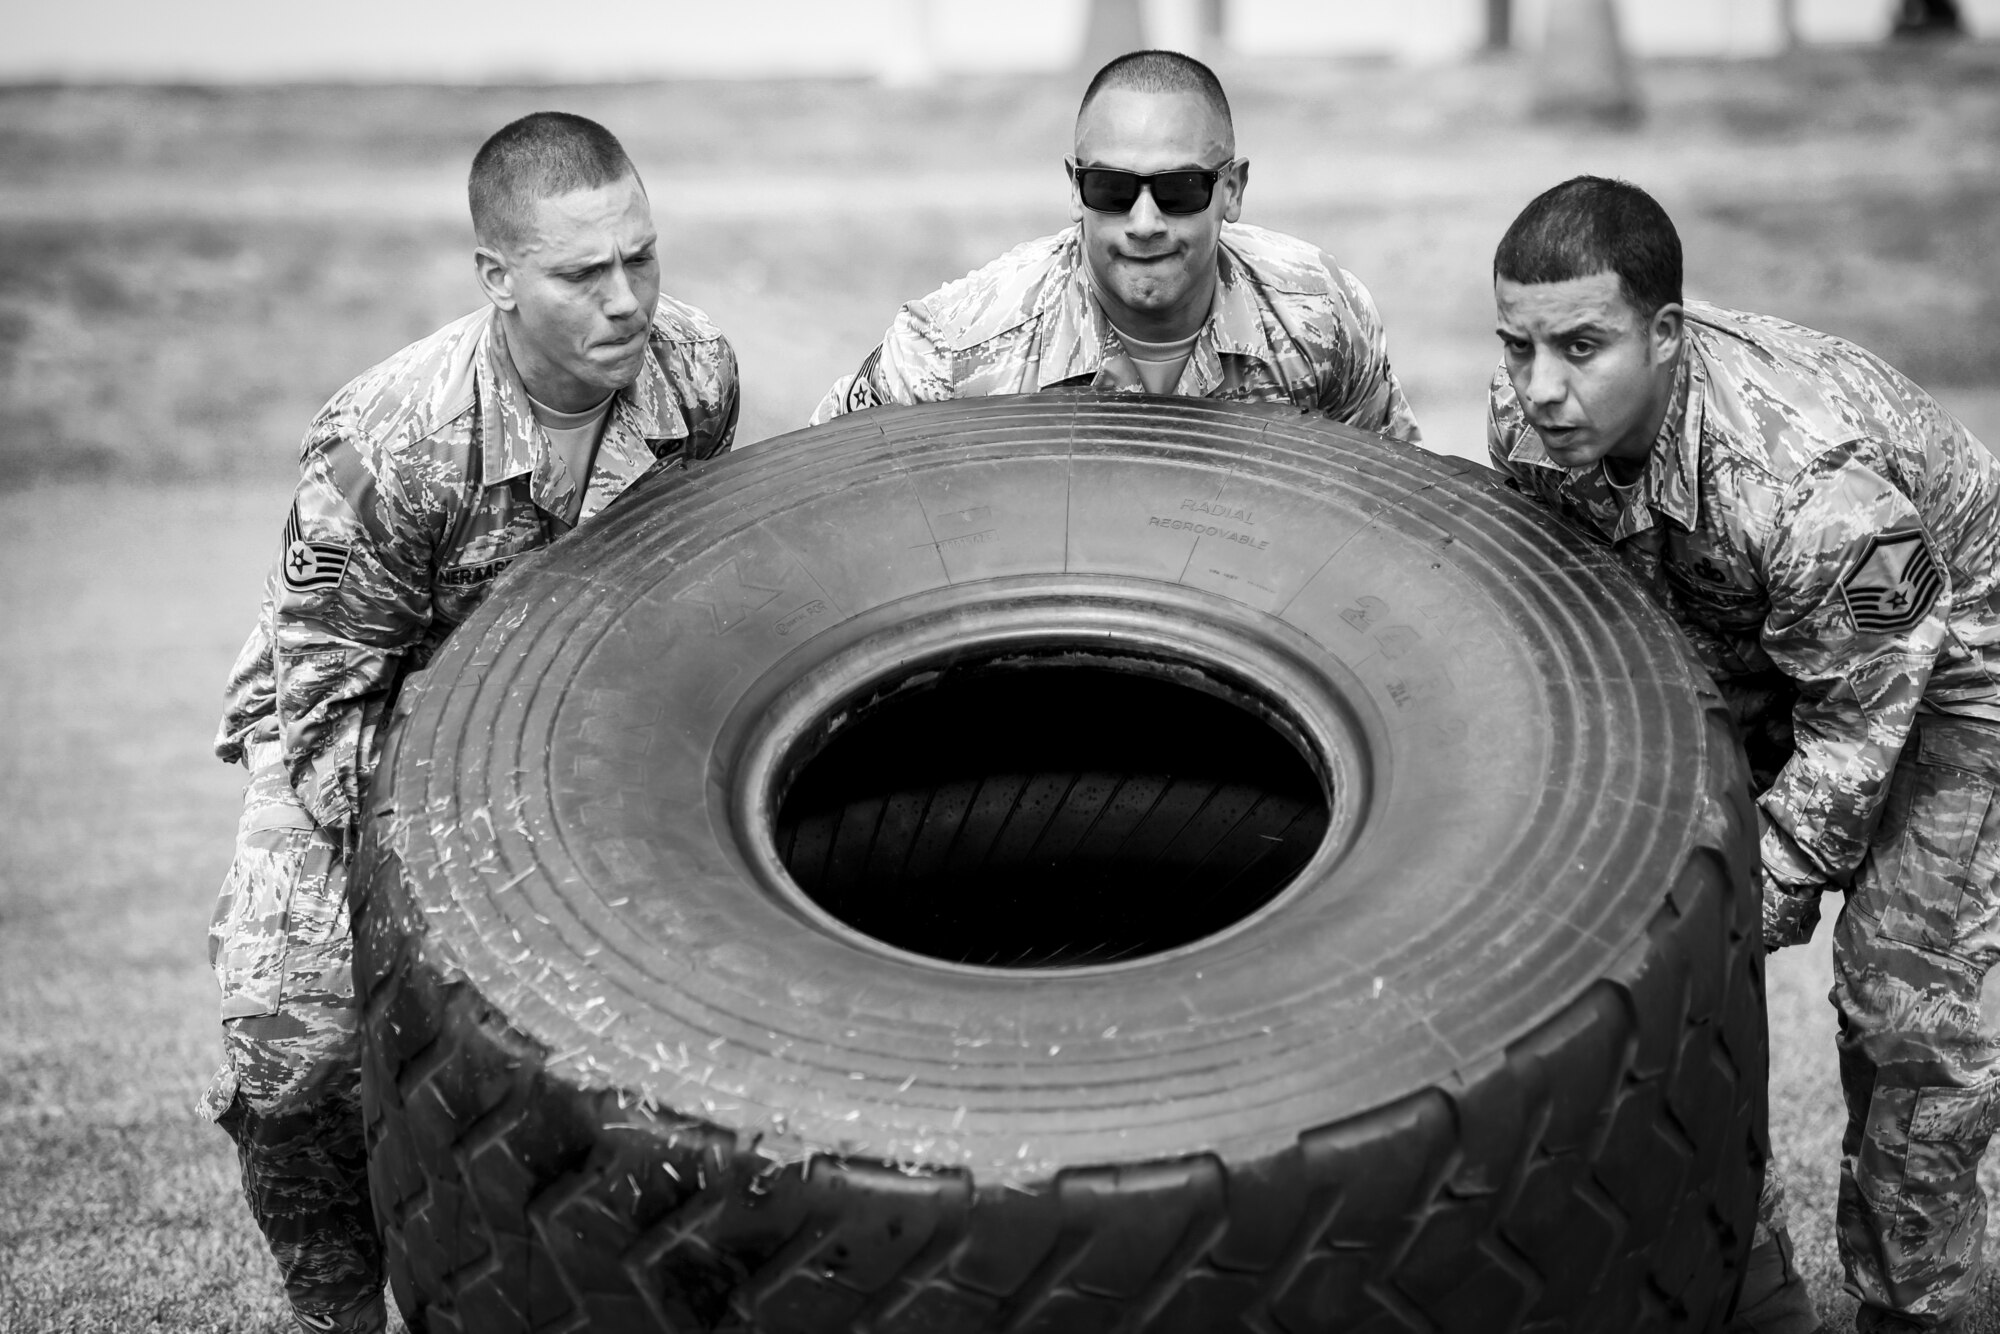 Security forces defenders from the 920th Rescue Wing, Patrick Air Force Base, Florida, put together an array of teambuilding activities as a way to say farewell to Chief Master Sgt. Stacie Moore, 920th SFS enlisted manager, on his retirement October 13, 2018. Events included rucking, running and all-around physical fitness as a way to pay tribute to his leadership. U.S. Air Force photo by Senior Airman Brandon Kalloo Sanes